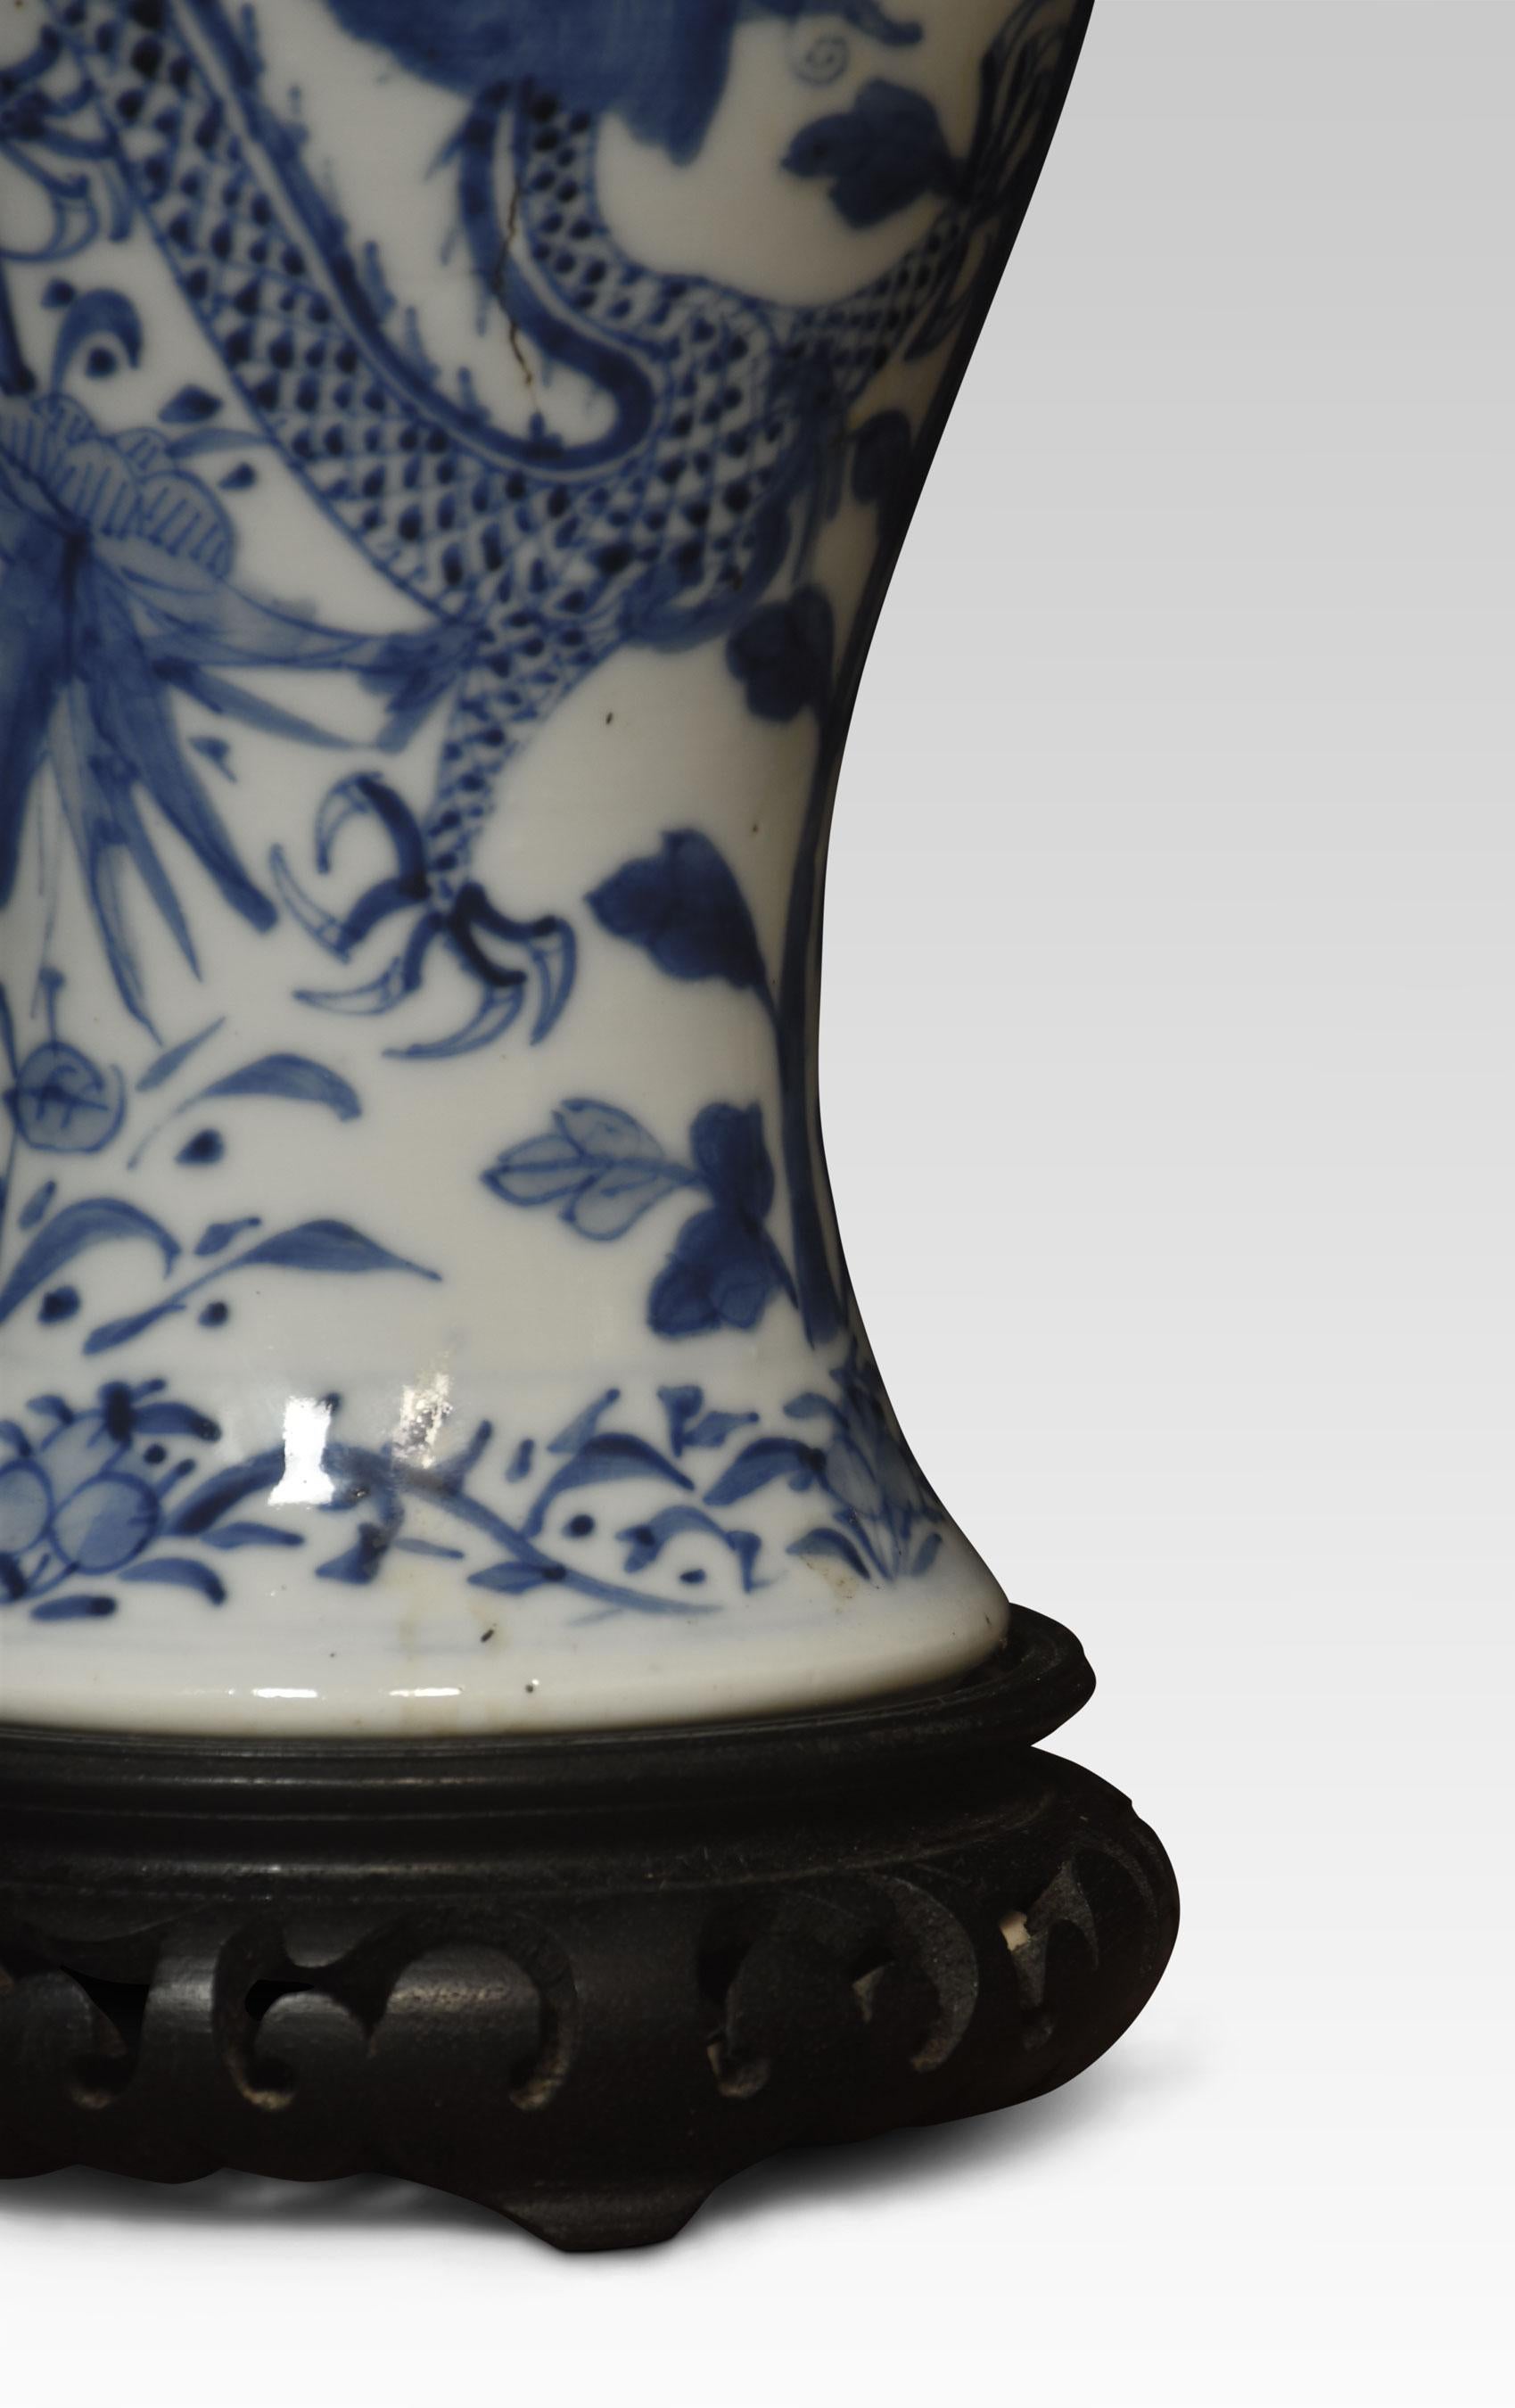 Chinese blue and white vase lamp decorated with oriental dragons and foliage on ebonies pierced base.
Dimensions :
Height 14 inches
Width 5 inches
Depth 5 inches.